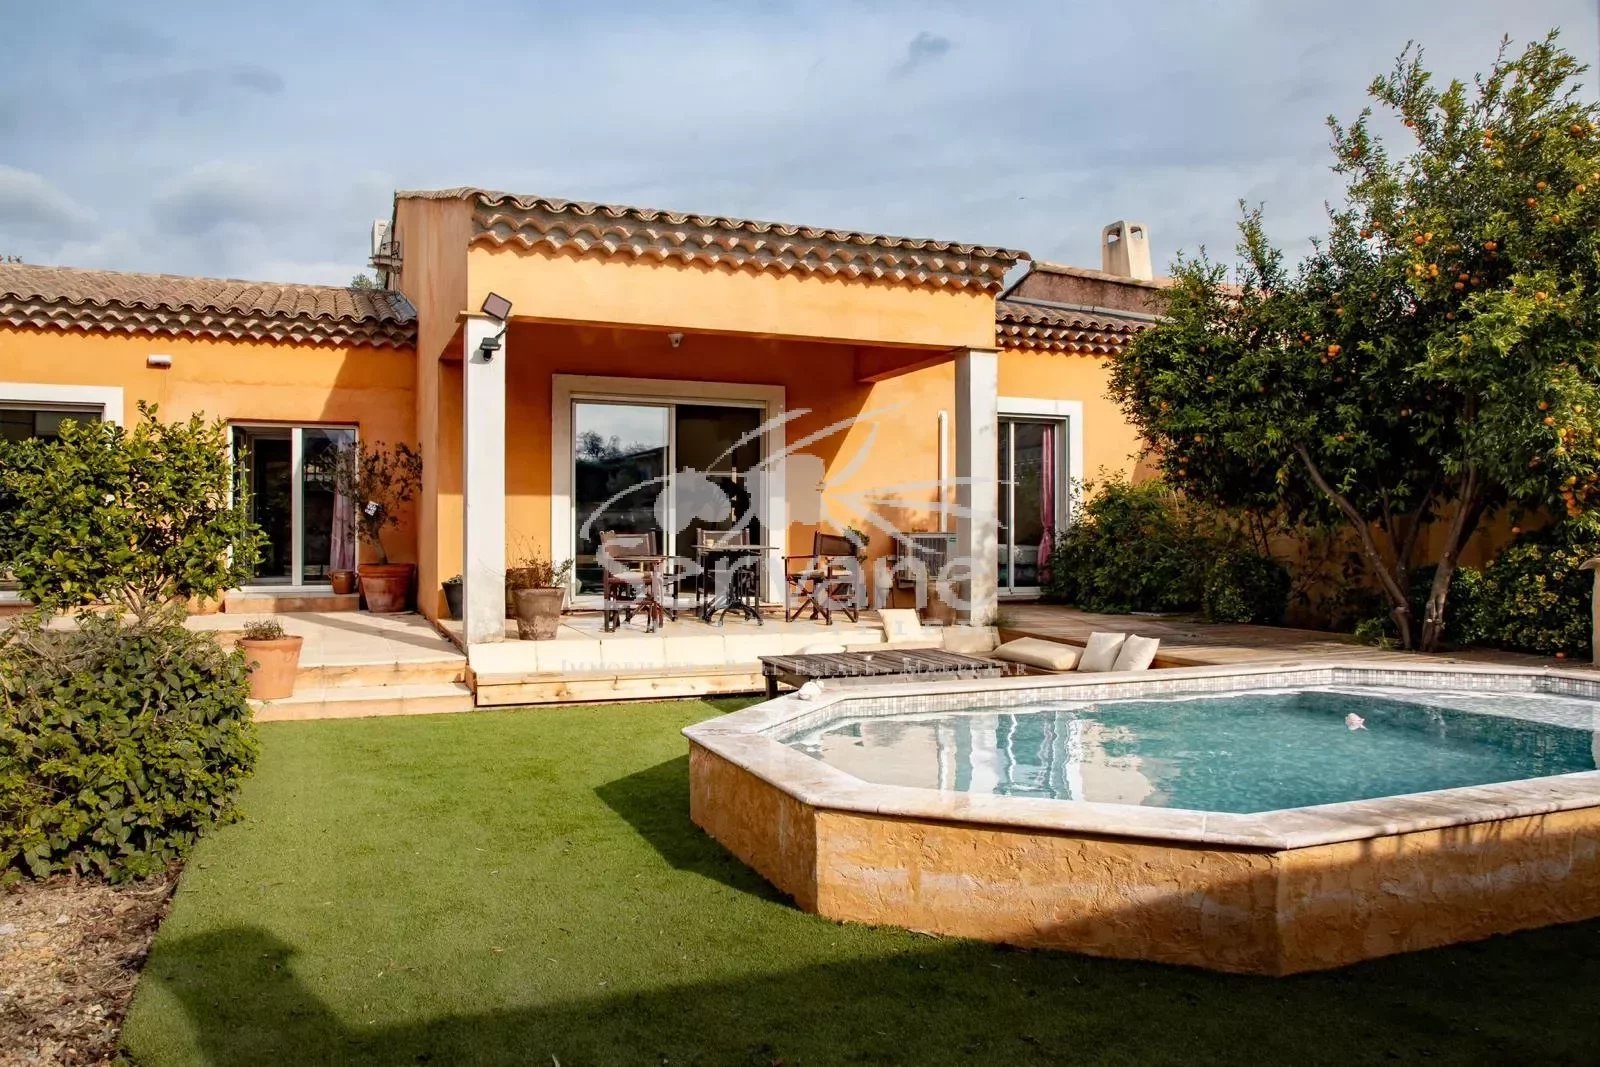 NICE T4 VILLA SETS ON 600 M² WITH POOL